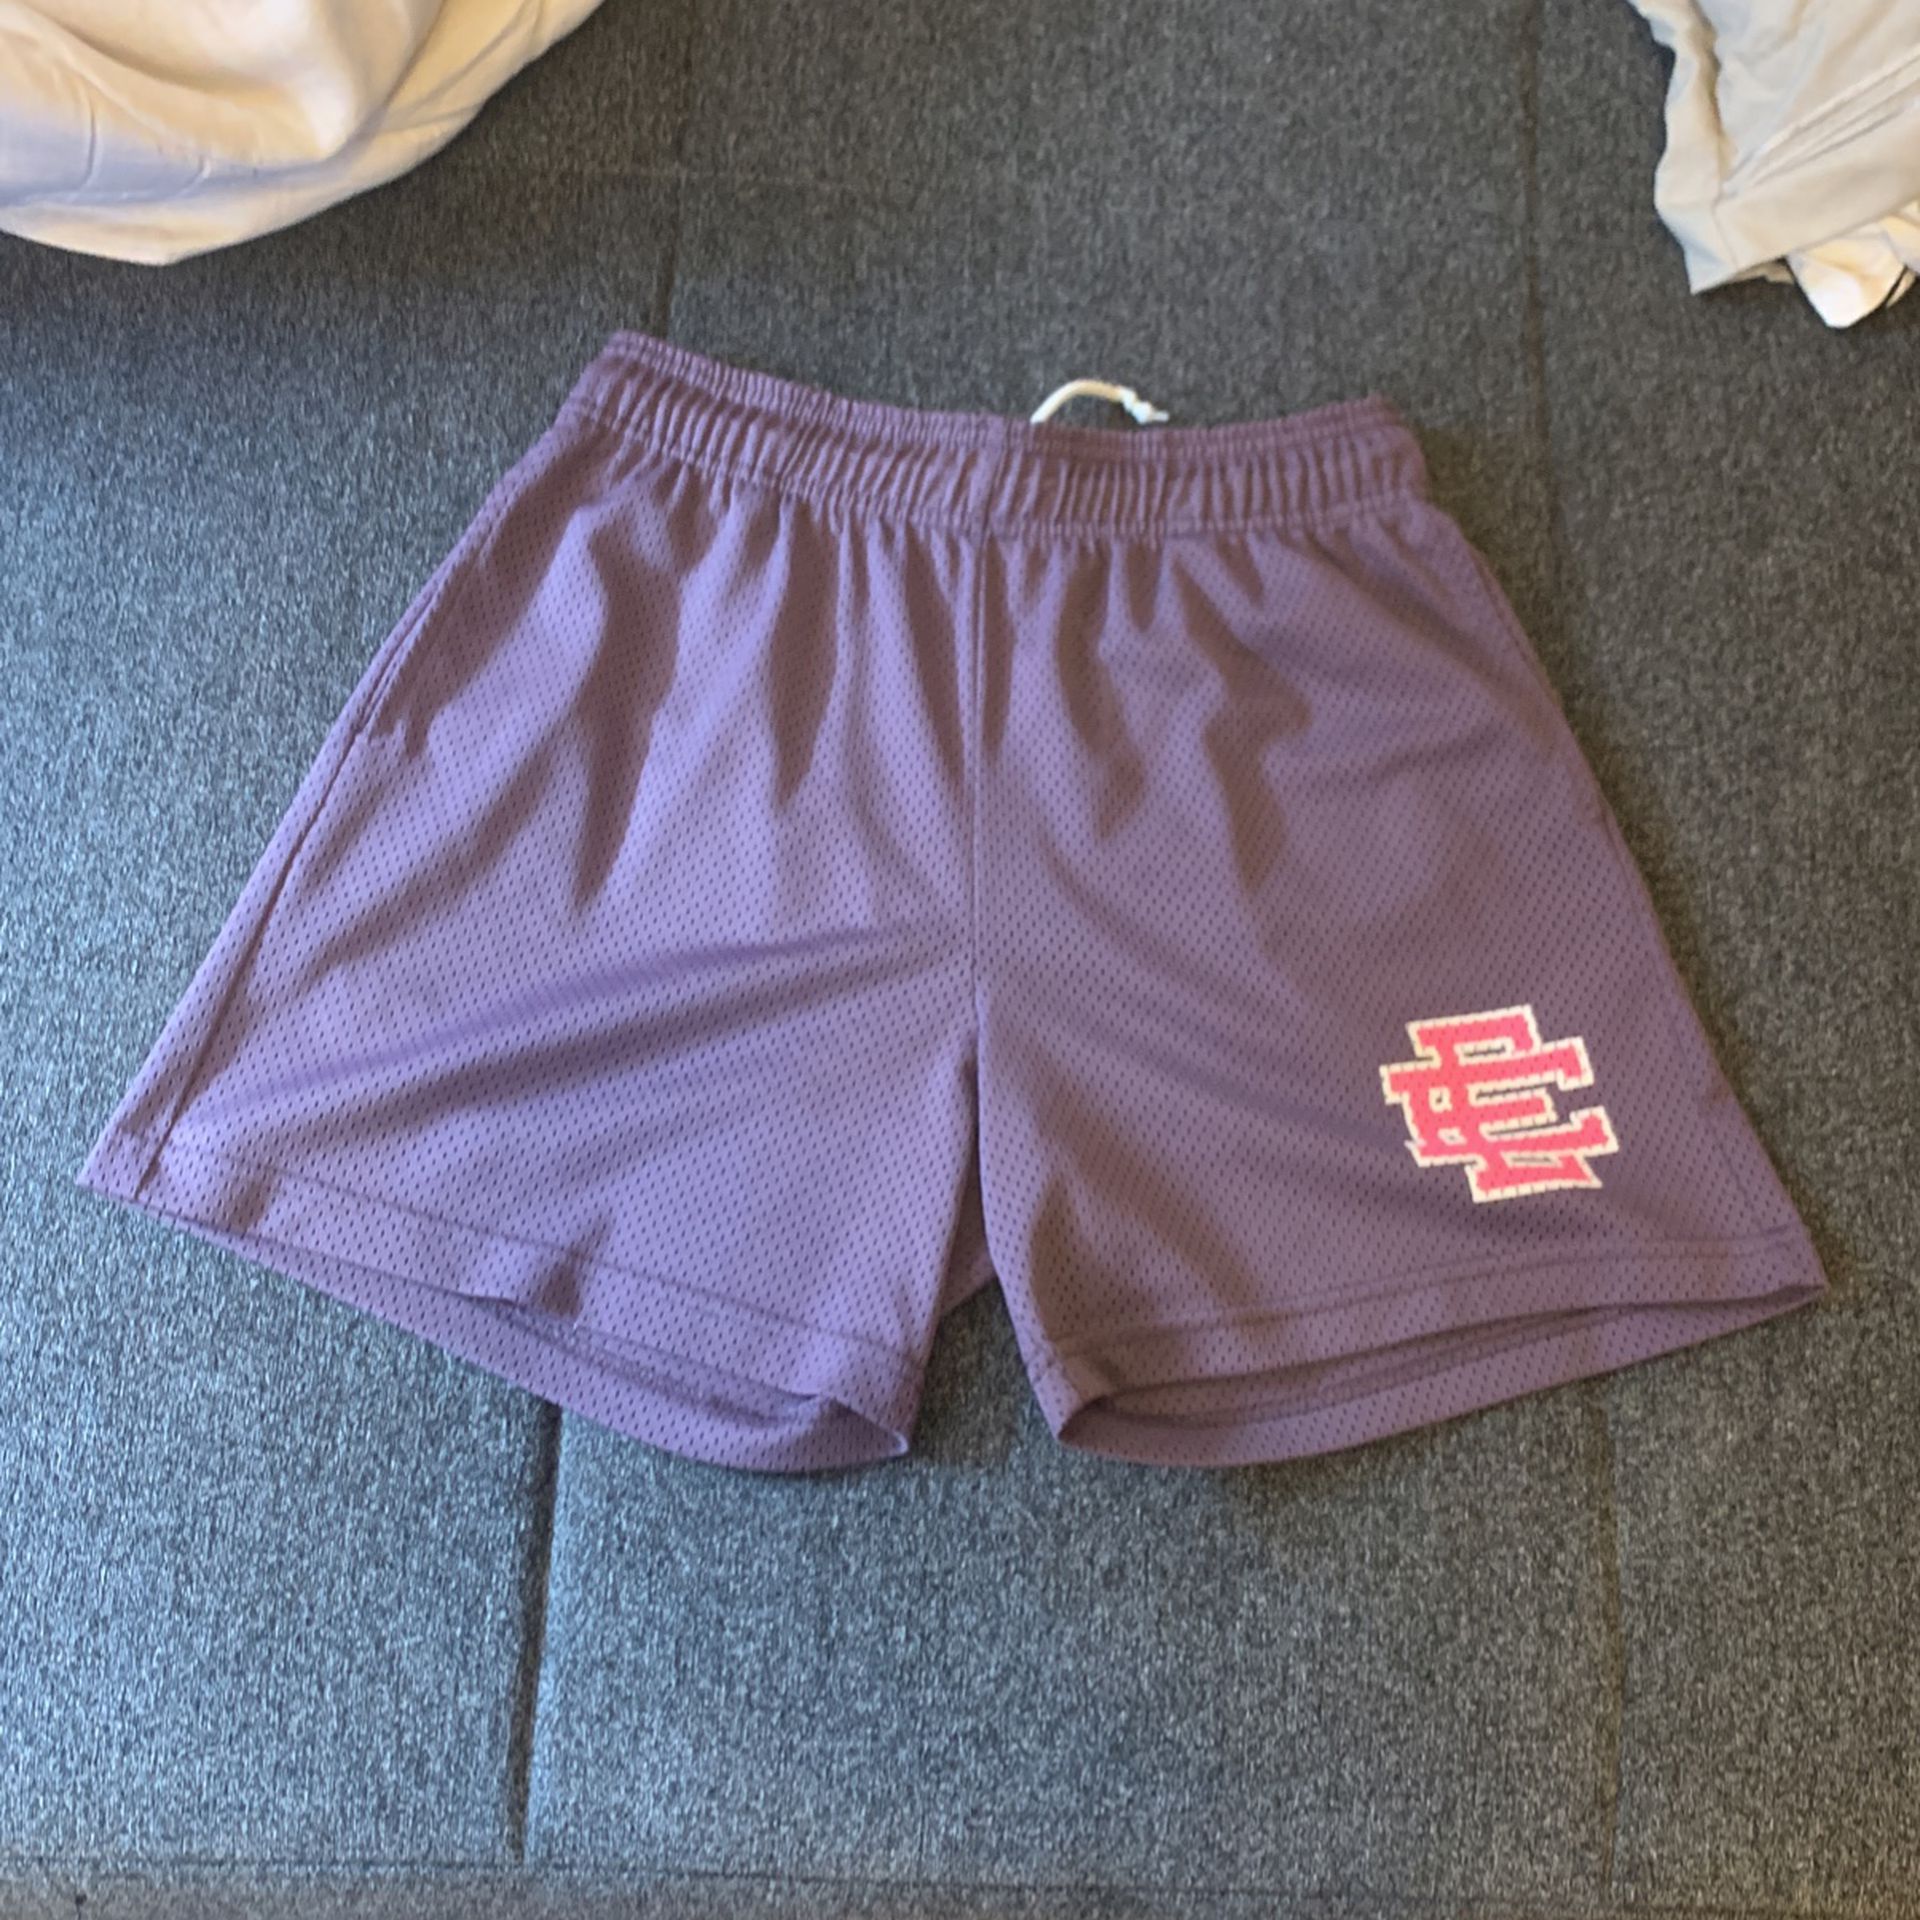 Ee Shorts for Sale in The Bronx, NY - OfferUp